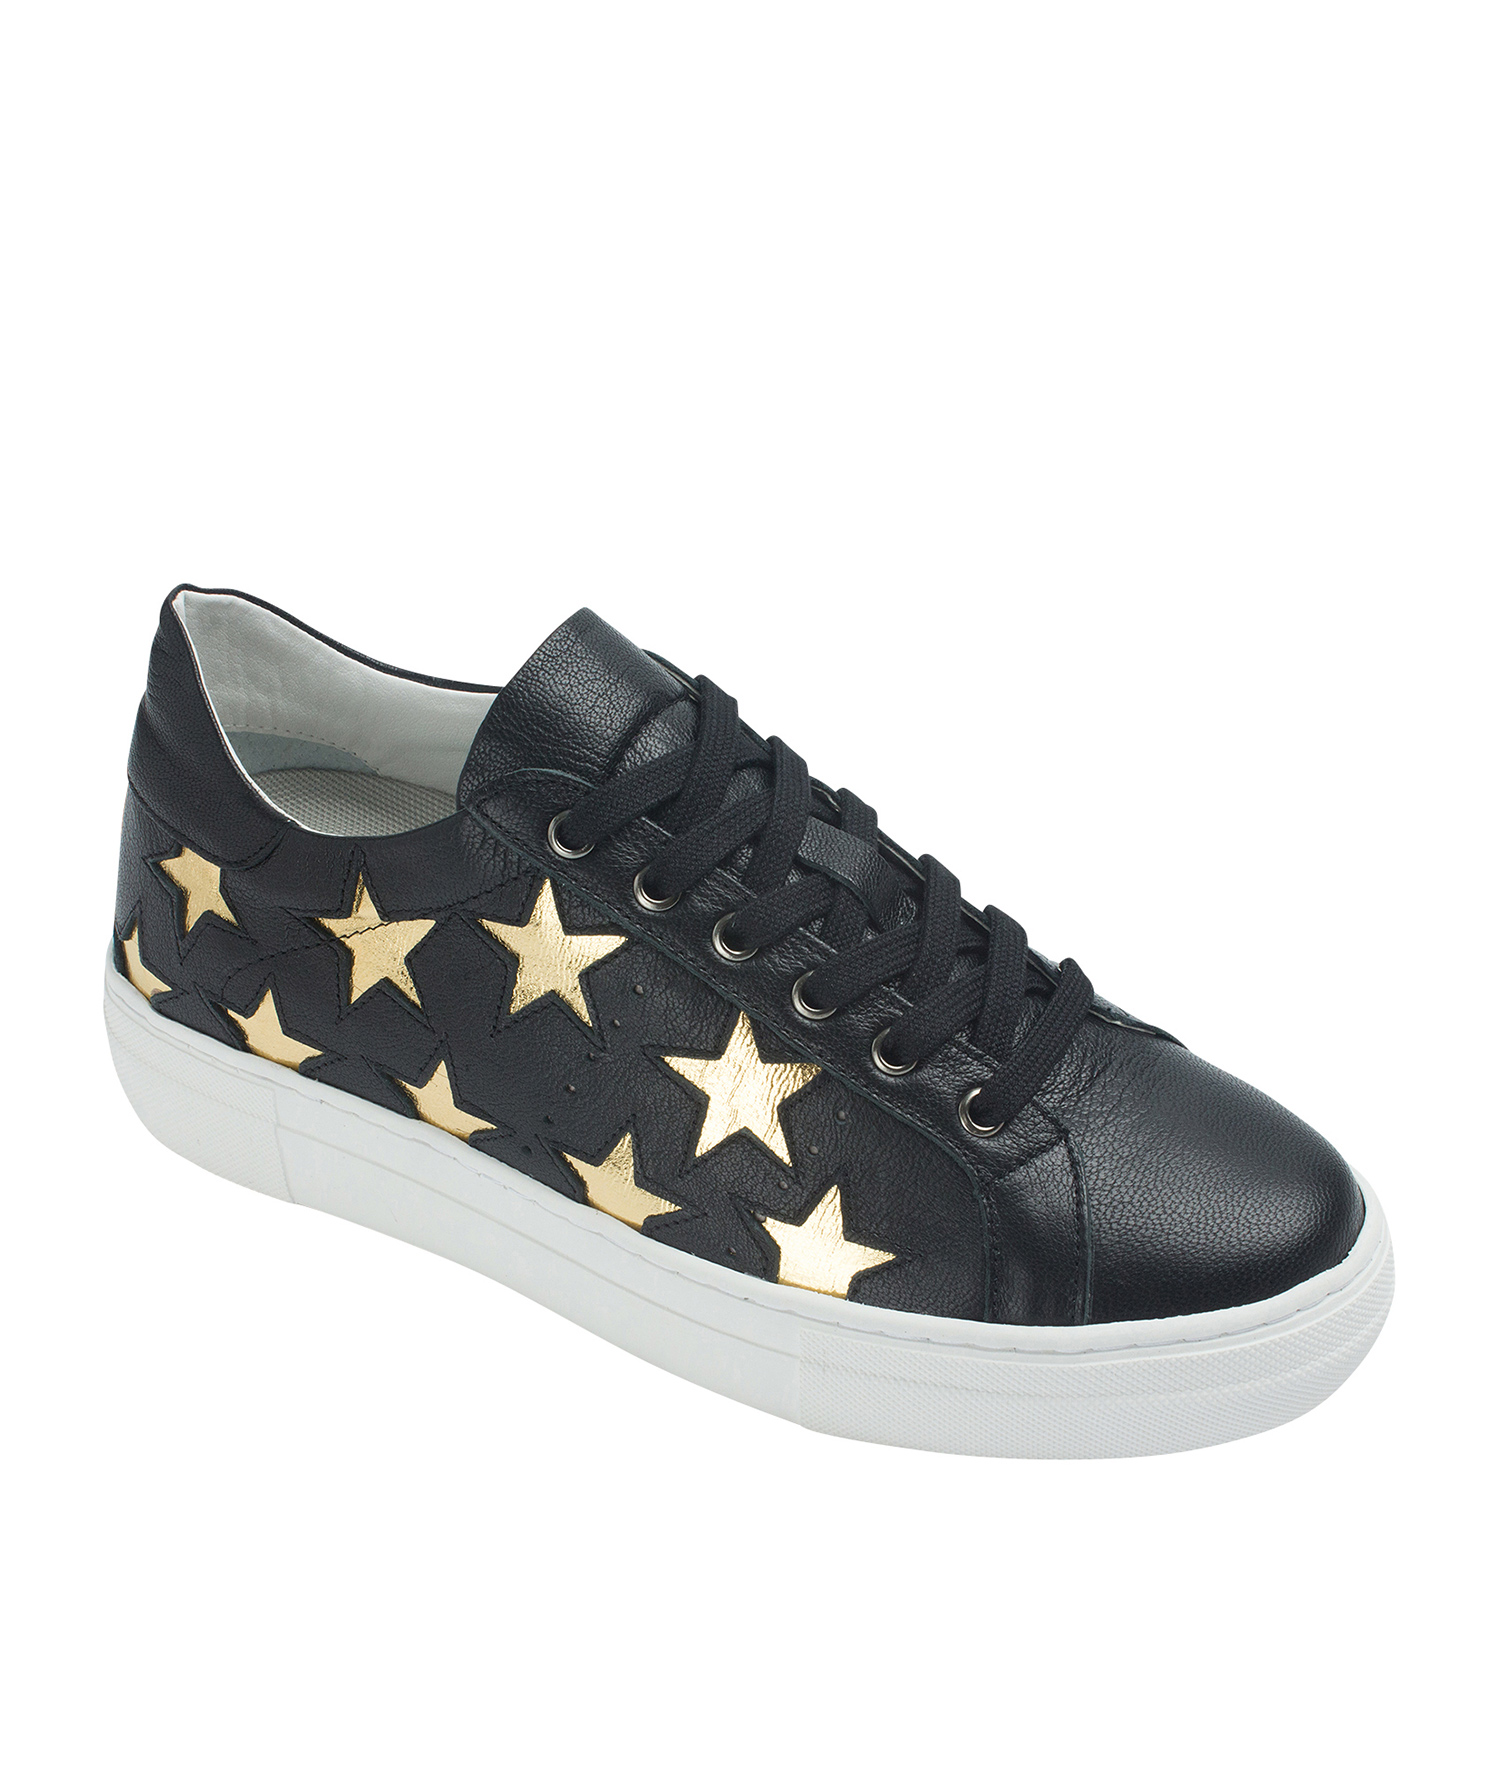 AnnaKastle Womens Genuine Leather Star Fashion Lace Up Platform Sneakers 